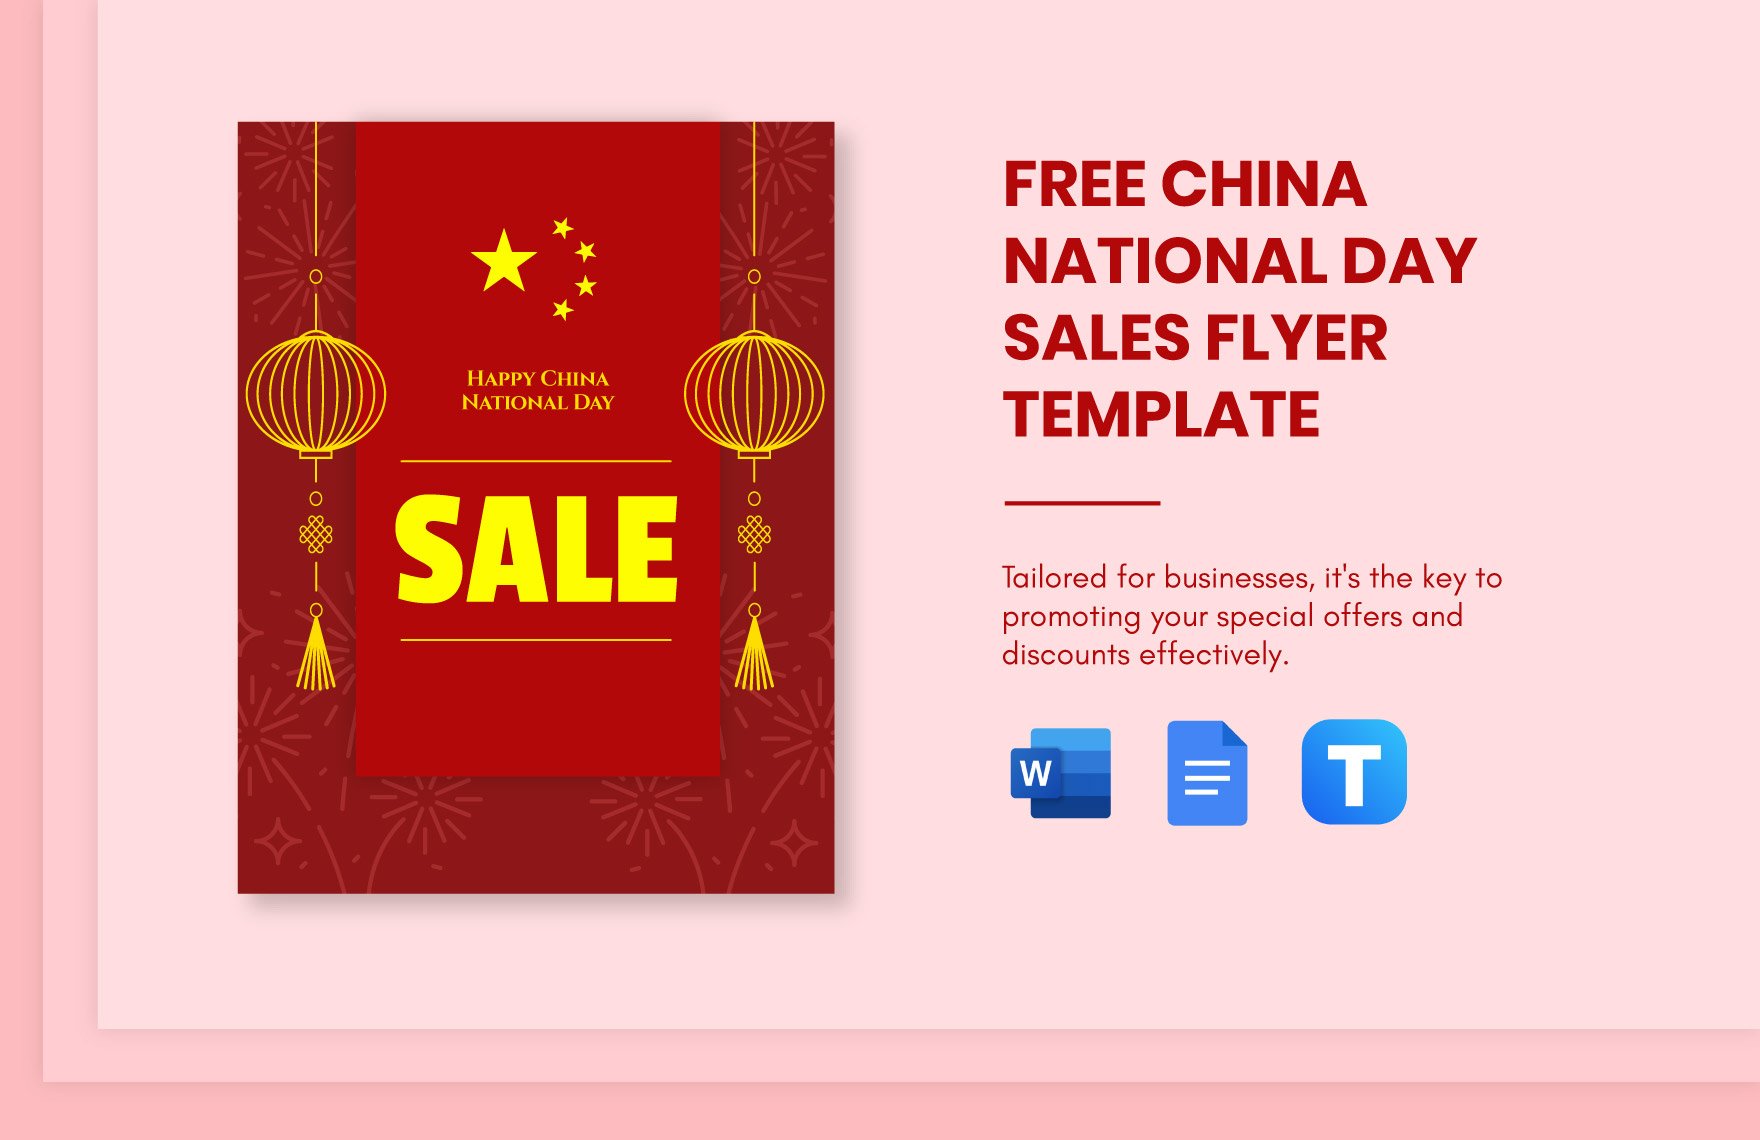 Free China National Day Sales Flyer Template in Word, Google Docs